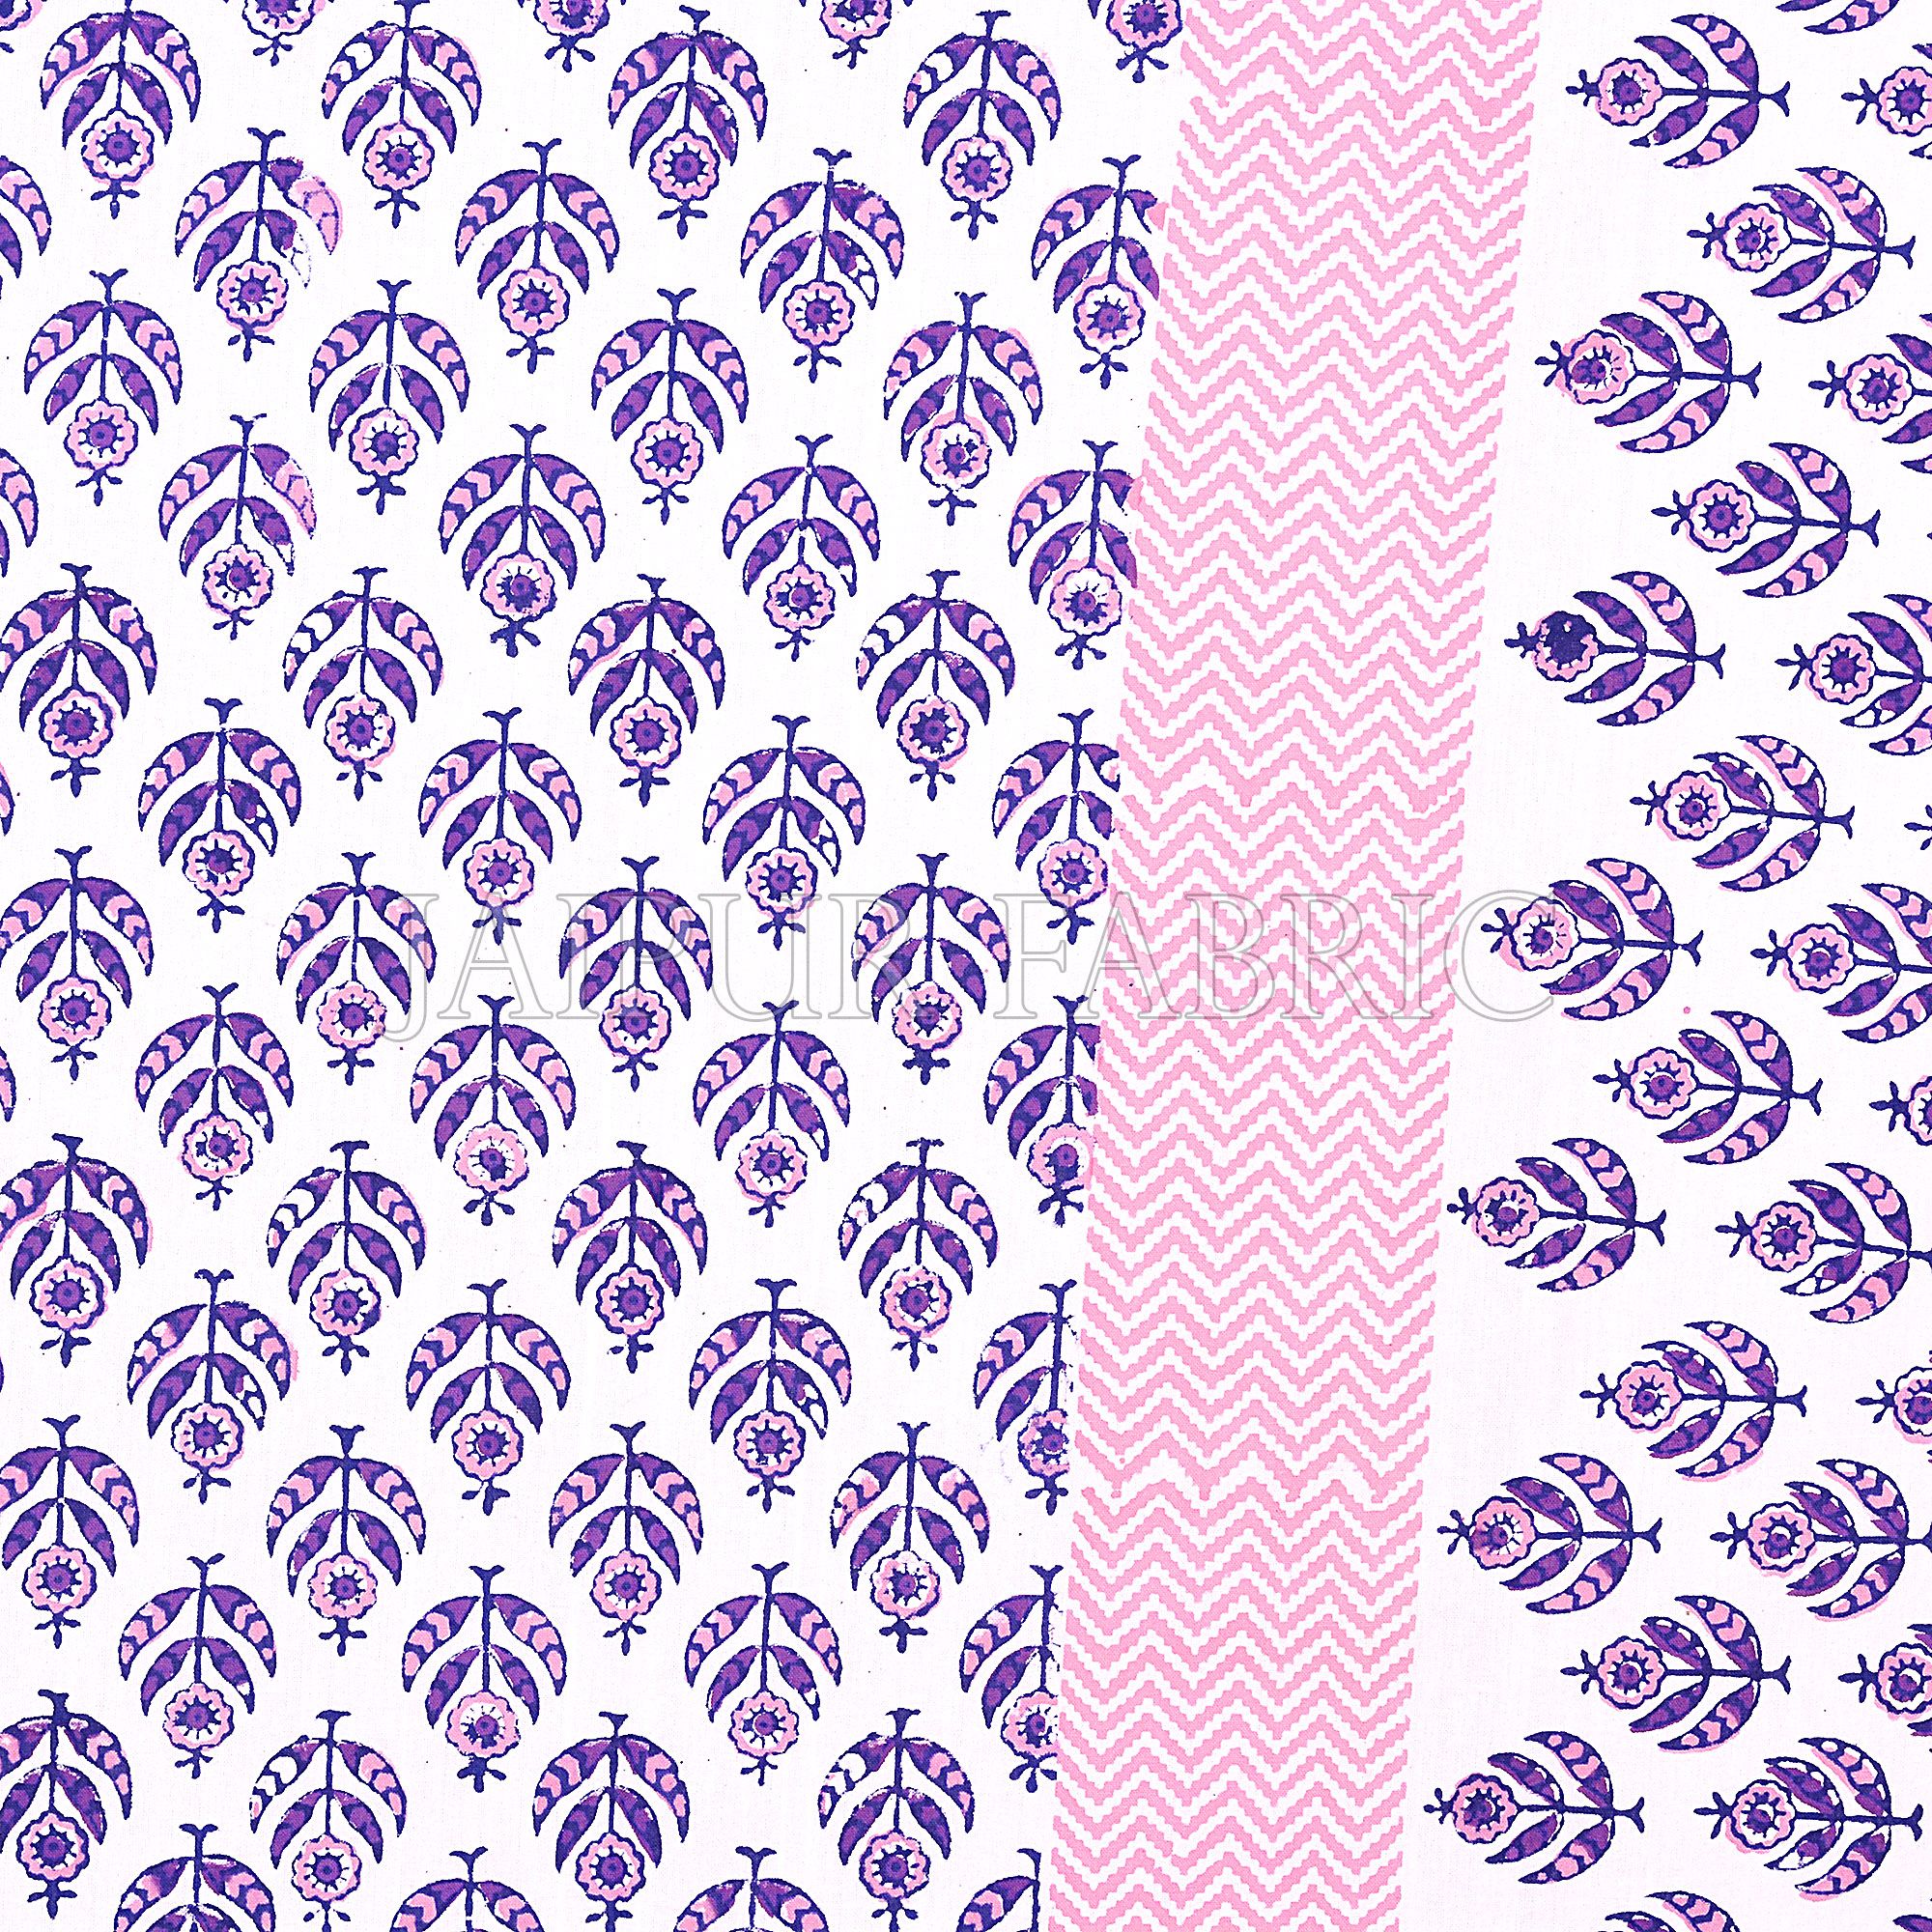 Purple Color Handmade Block Print on white base Double Bed Sheet with Two Pillow Covers